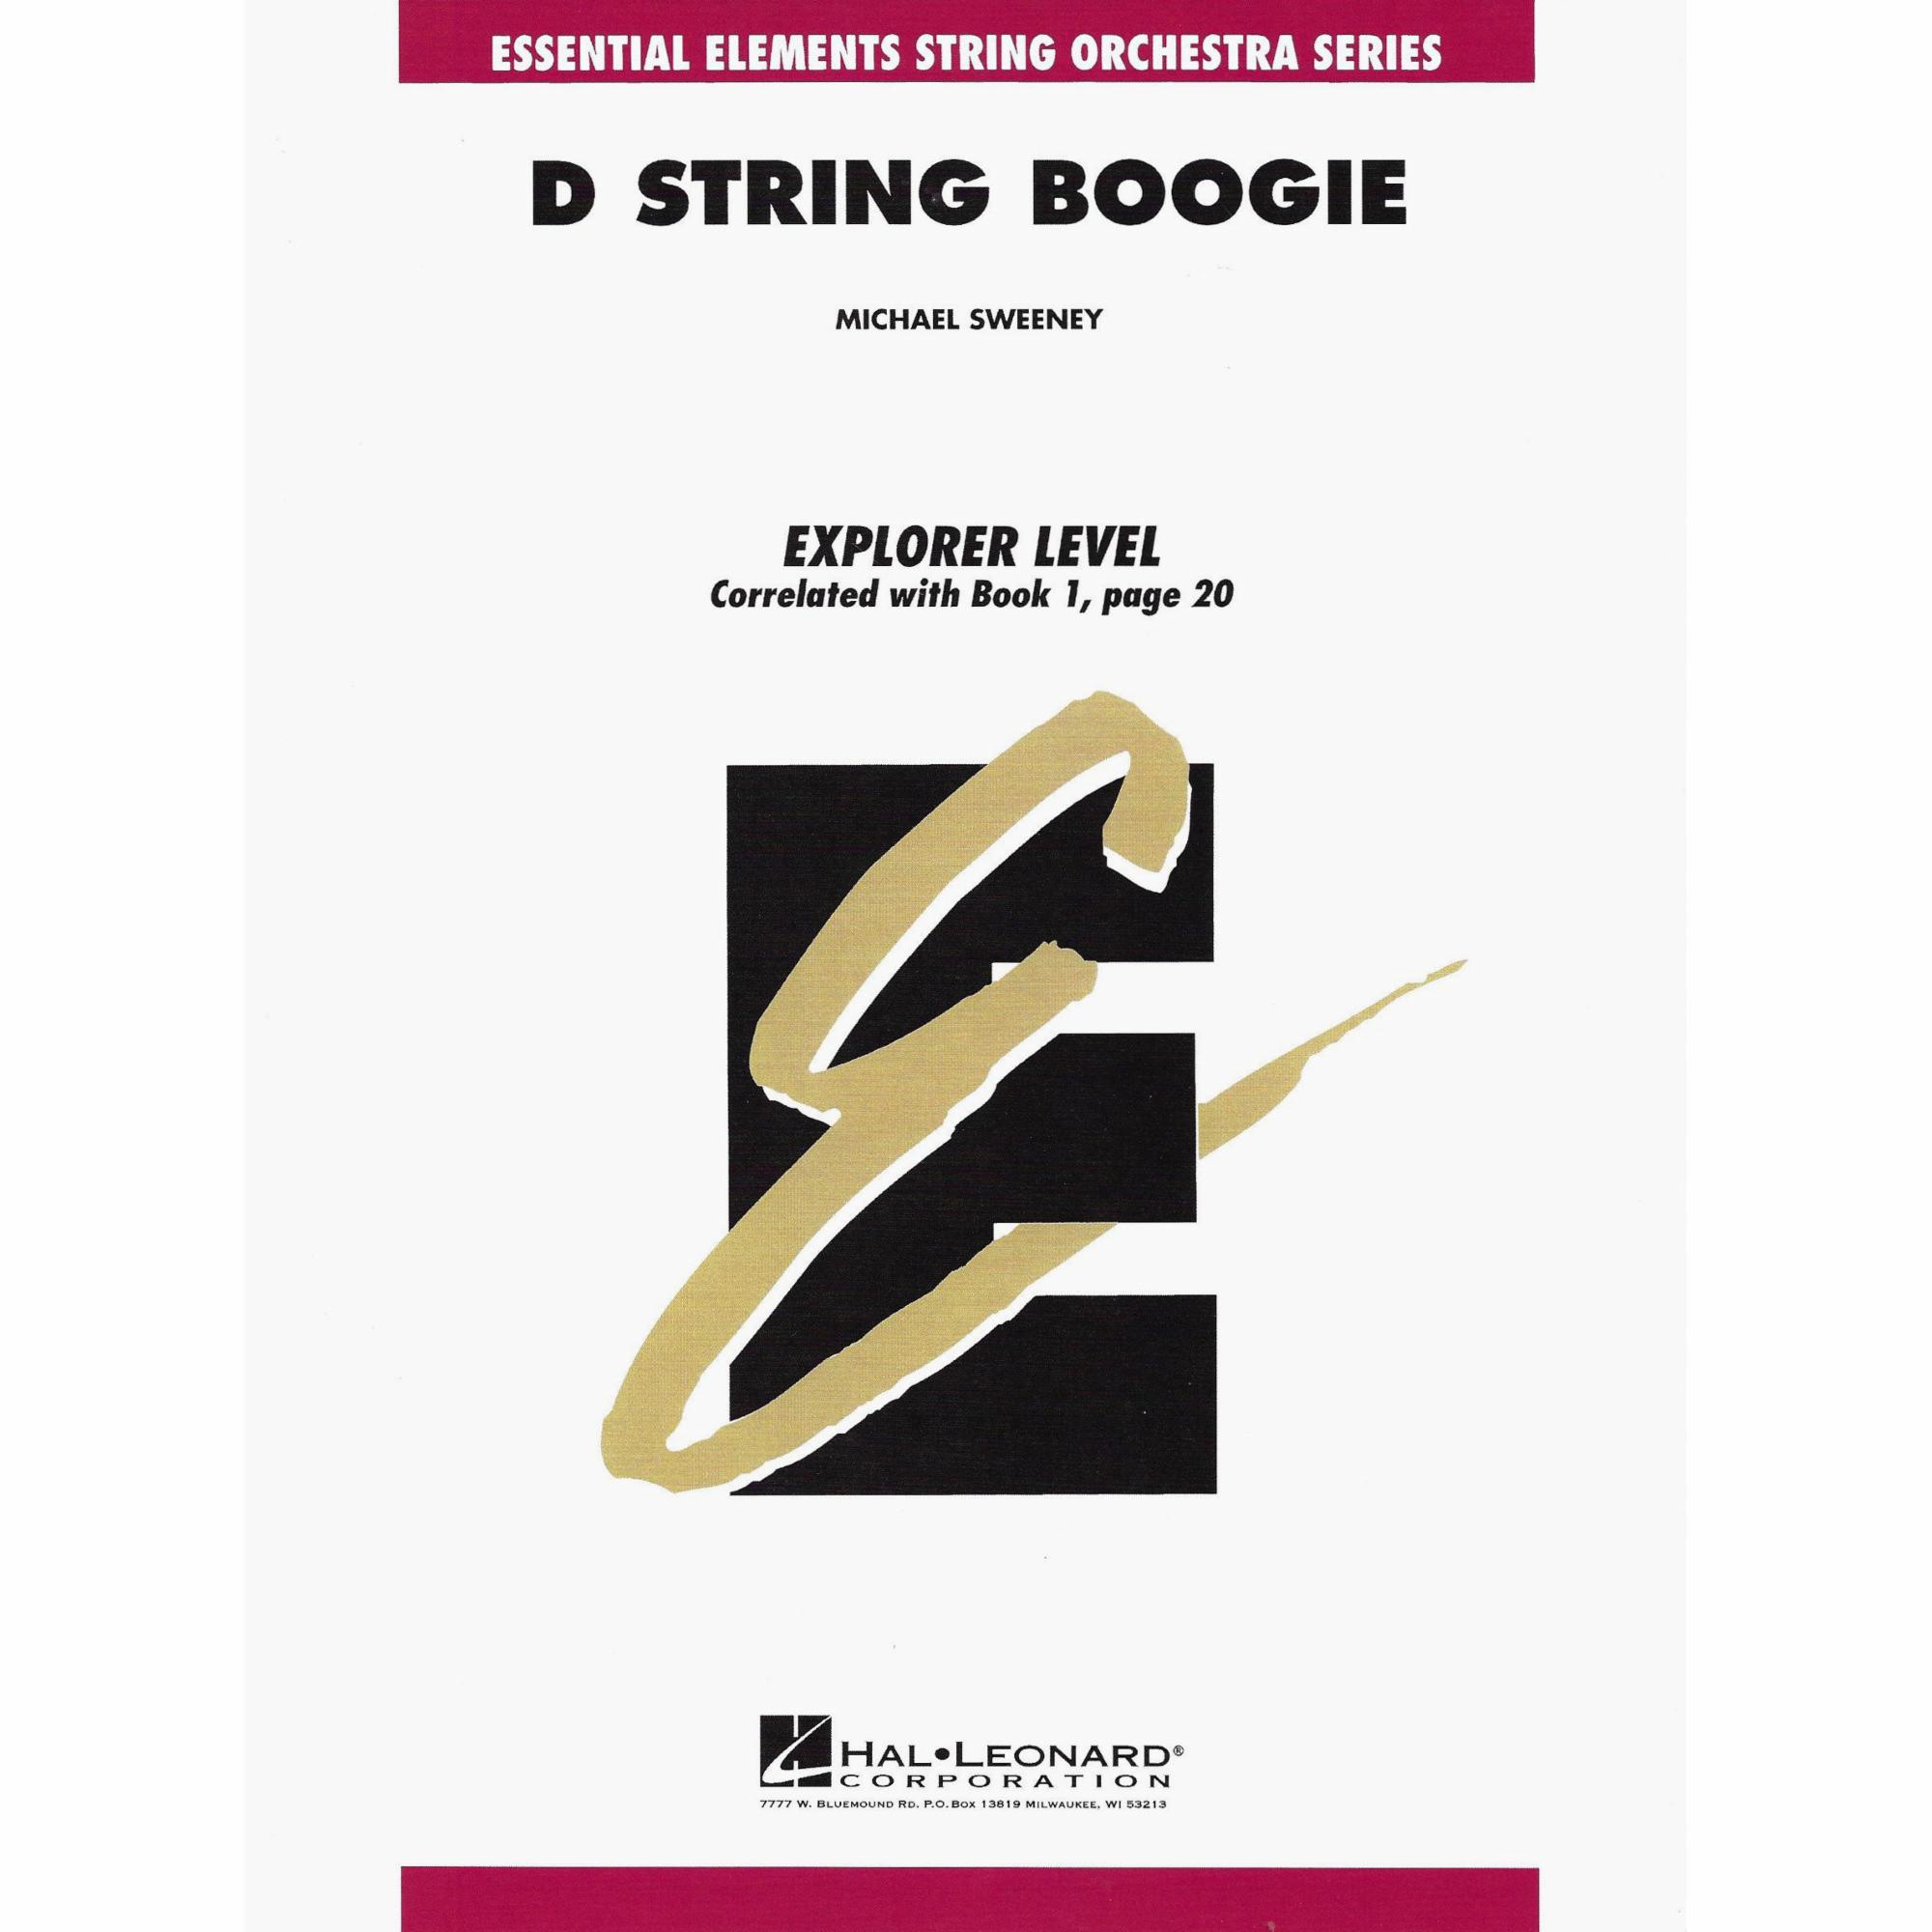 D String Boogie for String Orchestra